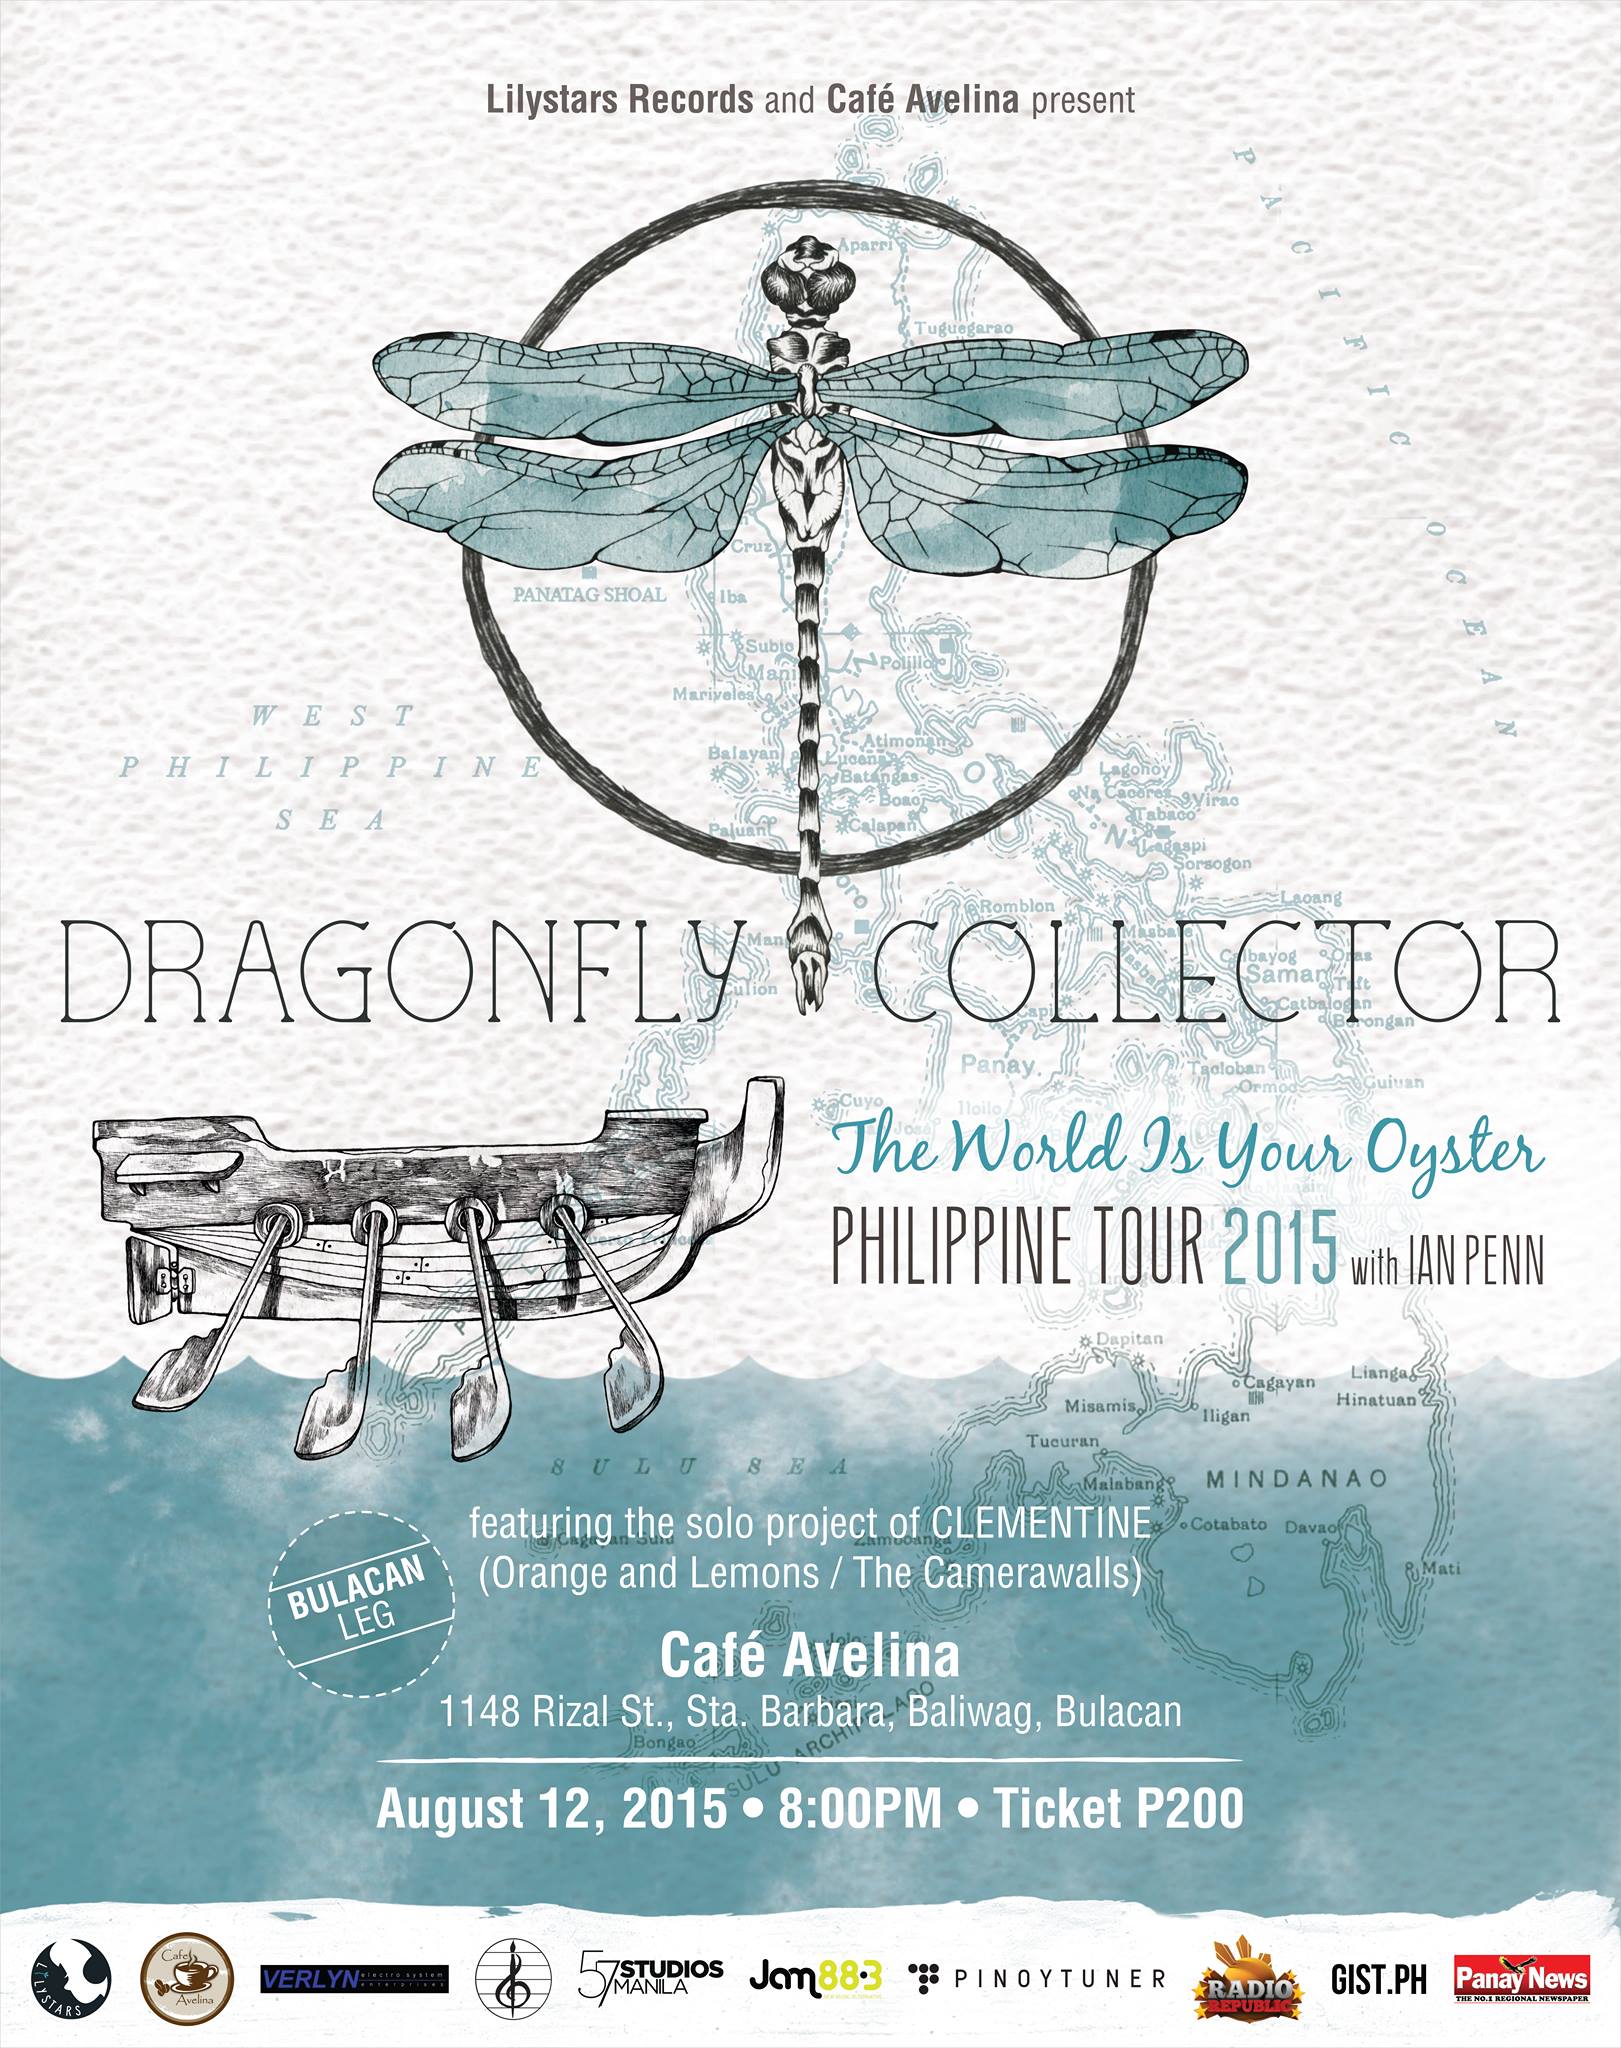 DRAGONFLY COLLECTOR: The World Is Your Oyster Philippine Tour 2015 [Baliwag Leg]     Wednesday, August 12     at 8:00pm     	     Show Map     Café Avelina - official     1148 Rizal St. Sta. Barbara, 3009 Baliuag, Bulacan Lilystars Records and Cafe Avelina present DRAGONFLY COLLECTOR The World Is Your Oyster Philippine Tour 2015 (Baliwag Leg) with Ian Penn featuring the solo project of Clem Castro aka Clementine (Orange & Lemons / The Camerawalls) CAFE AVELINA 1148 Rizal St., Sta. Barbara, Baliwag, Bulacan August 12, 2015, 8:00 PM Tickets: P200 For tickets and reservations e-mail info@dragonflycollector or contact 09164004343 / 09175386569 Tour poster by Ige Trinidad Also brought to you by Jam 88.3, Pinoytuner, Radio Republic, Gist, Cuerdas Music and Arts Center and Verlyn Electro System